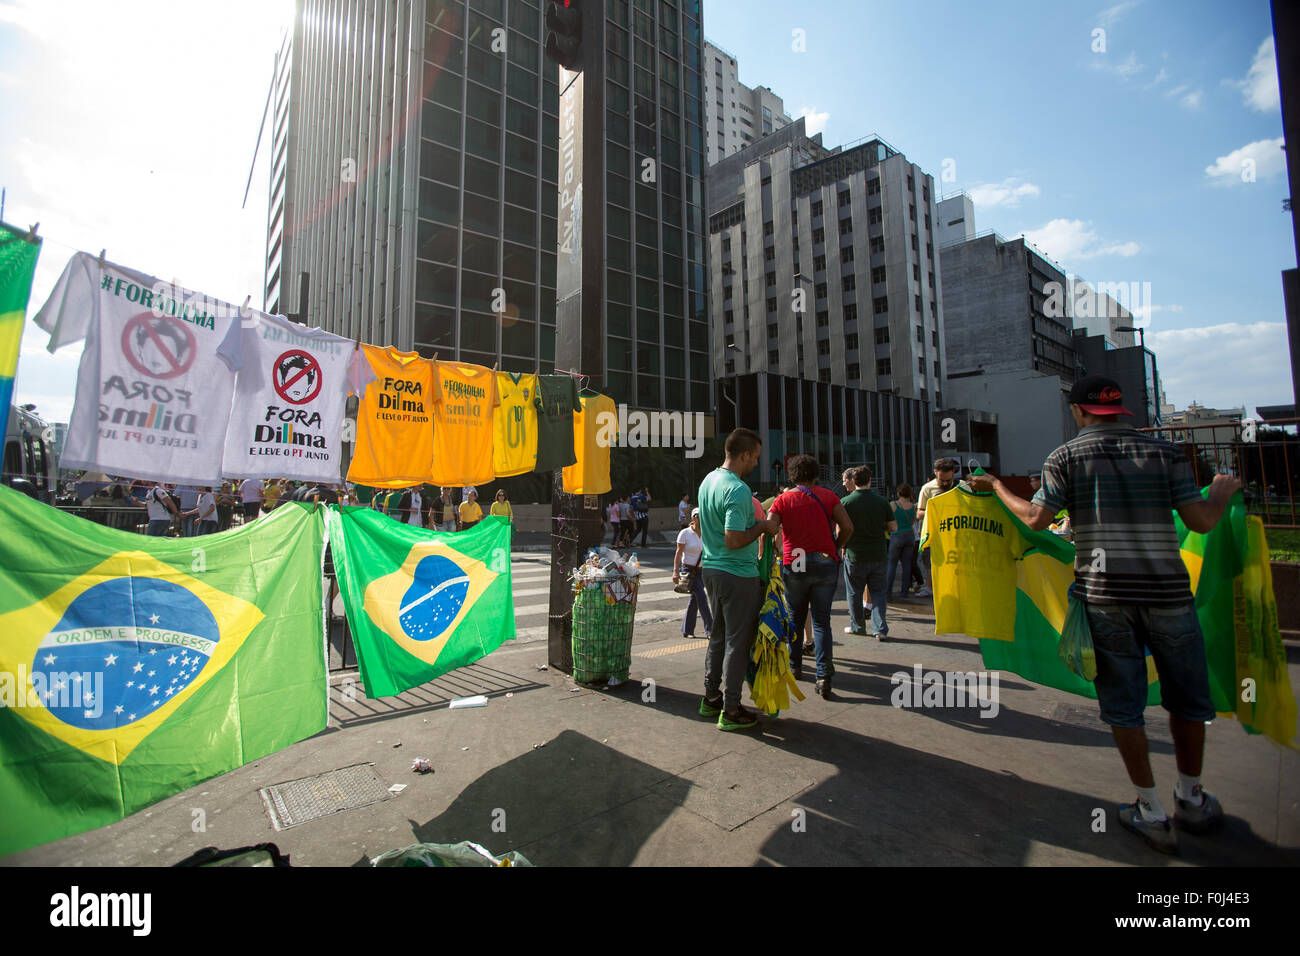 Sao Paulo, Brazil. 16th Aug, 2015. Venders sale Brazil national flag and T-shirt with slogan 'Dilma out' on the Paulista Avenue during an anti-government demonstration in Sao Paulo, Brazil, Aug. 16, 2015. A demonstration took place on the Paulista Avenue in downtown Sao Paulo on Sunday with thousands of protesters marching with slogans on flags and cardboards. Support for Brazilian President Dilma Rousseff has fallen to eight percent in a recent poll as she was accused of failing to curb corruption and the slump of economy. Credit:  Xu Zijian/Xinhua/Alamy Live News Stock Photo